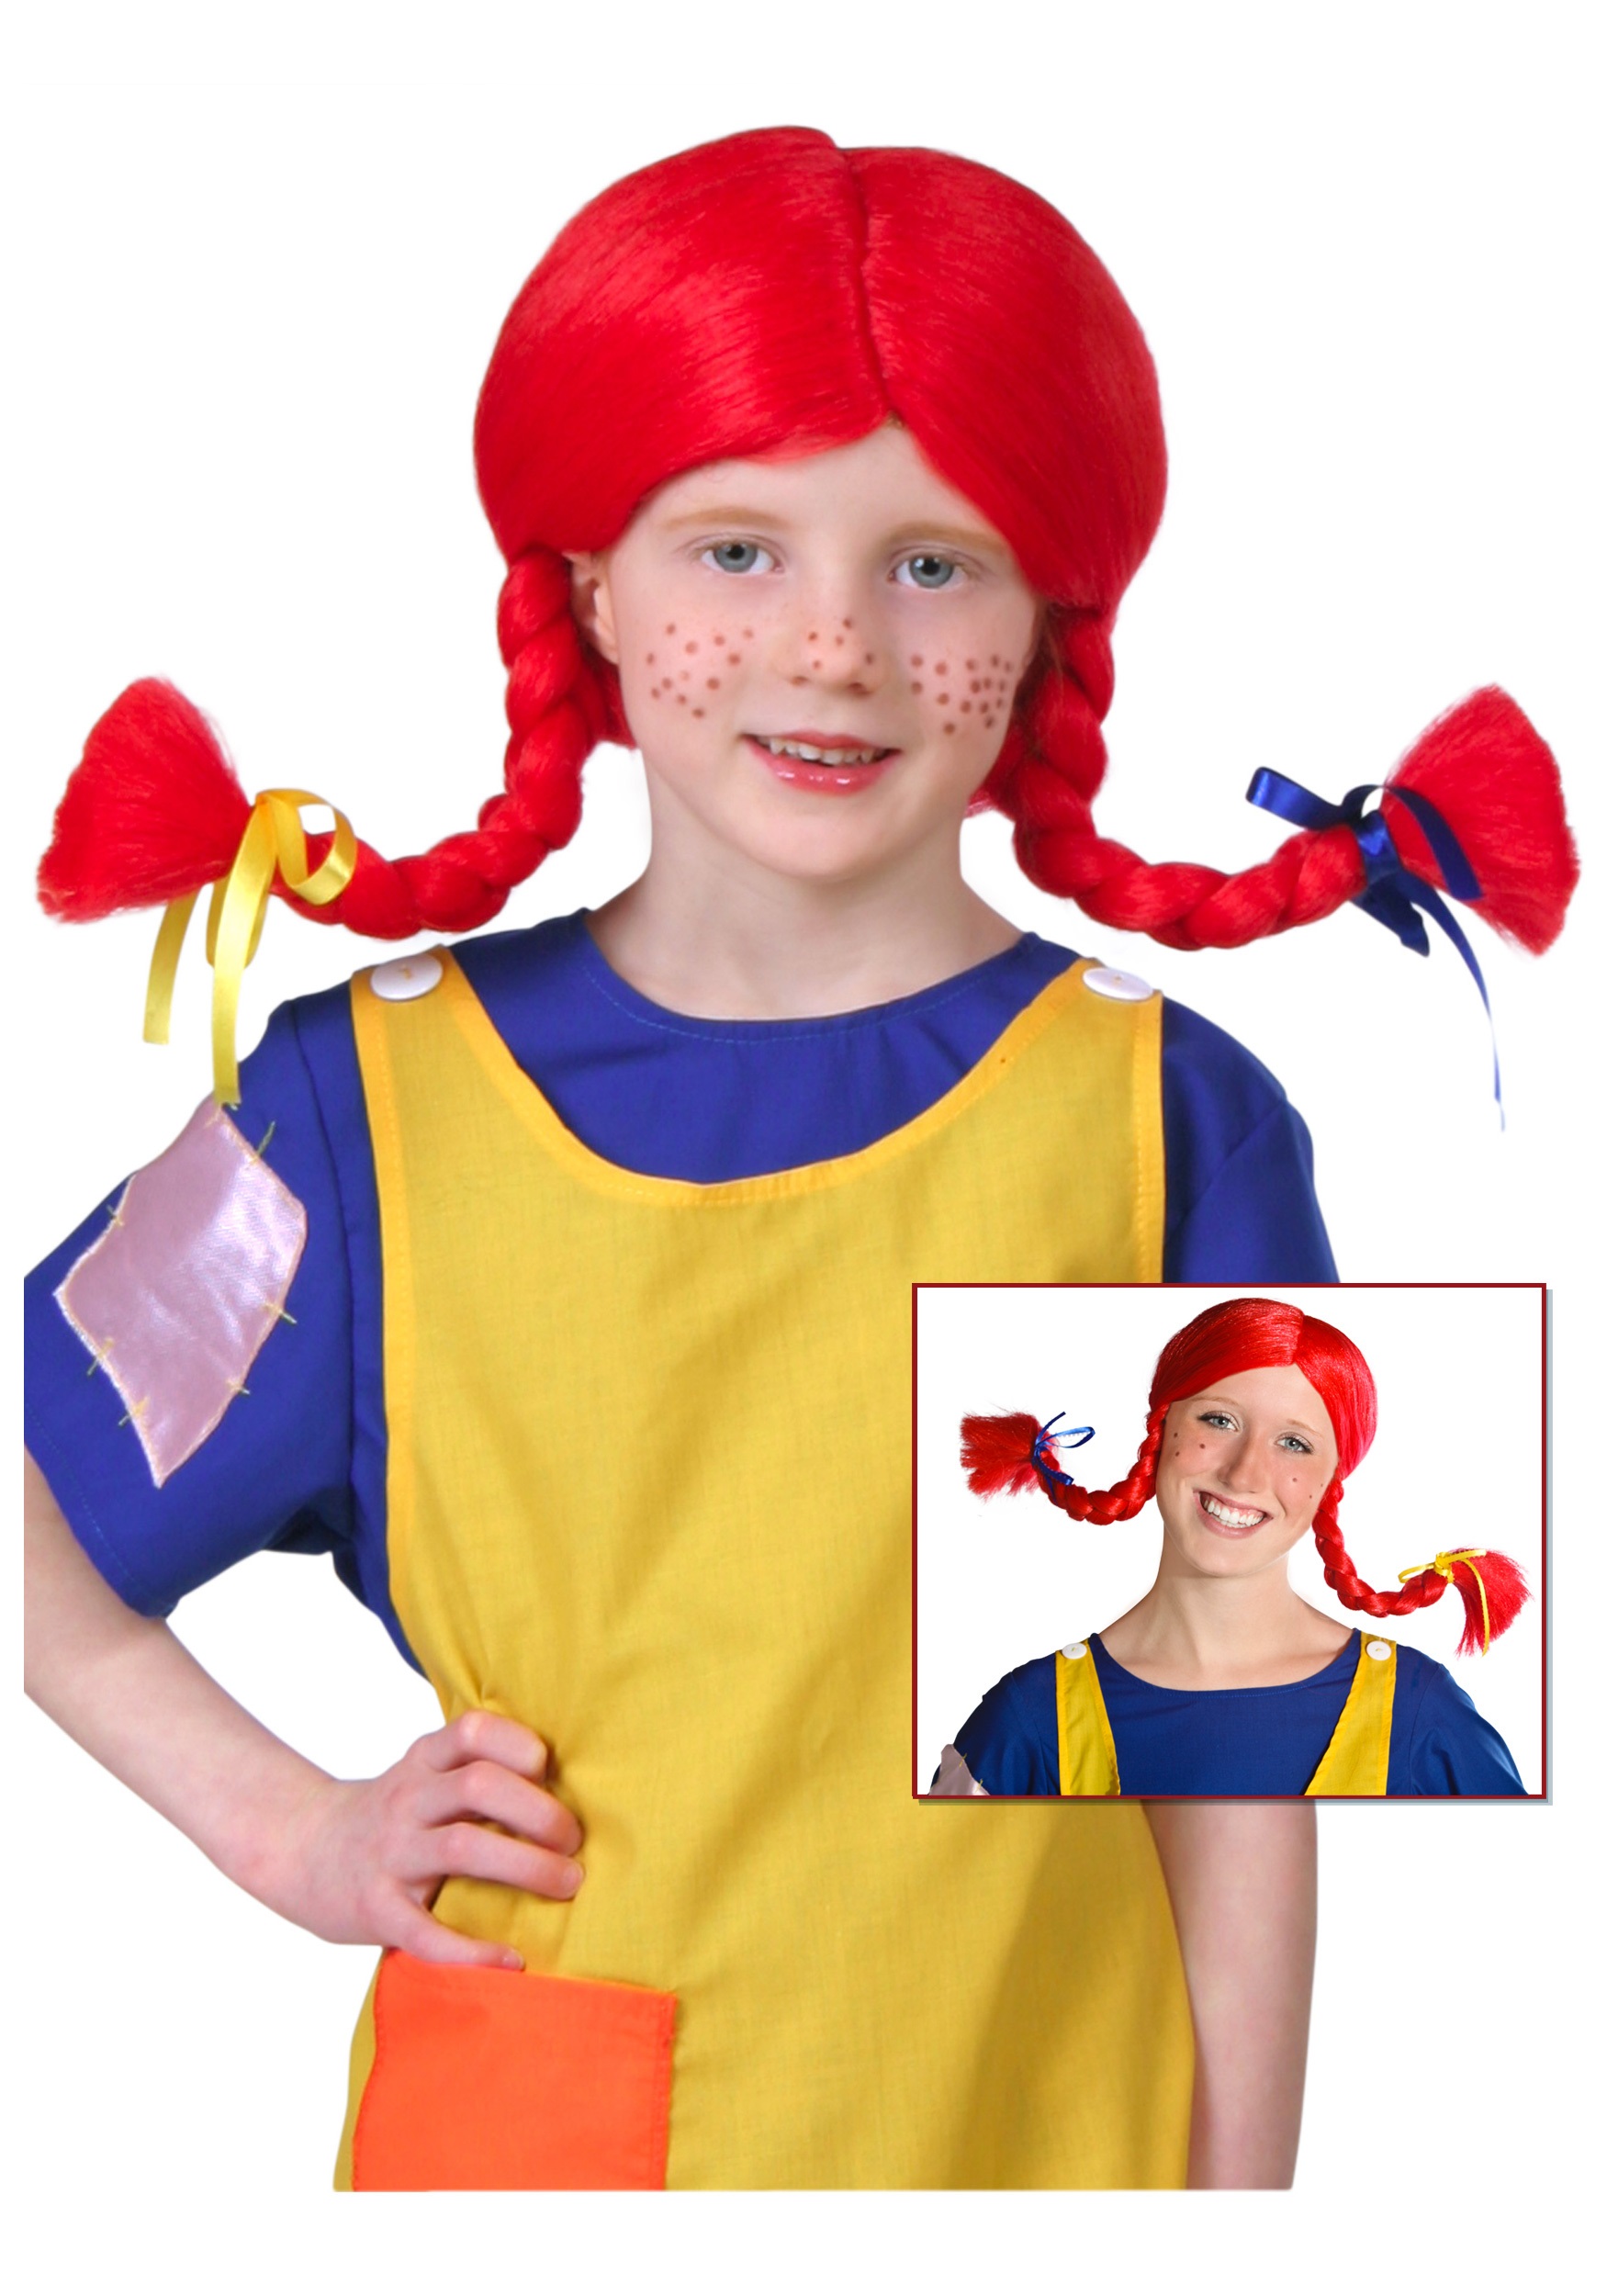 pippi longstocking costume ideas for adults